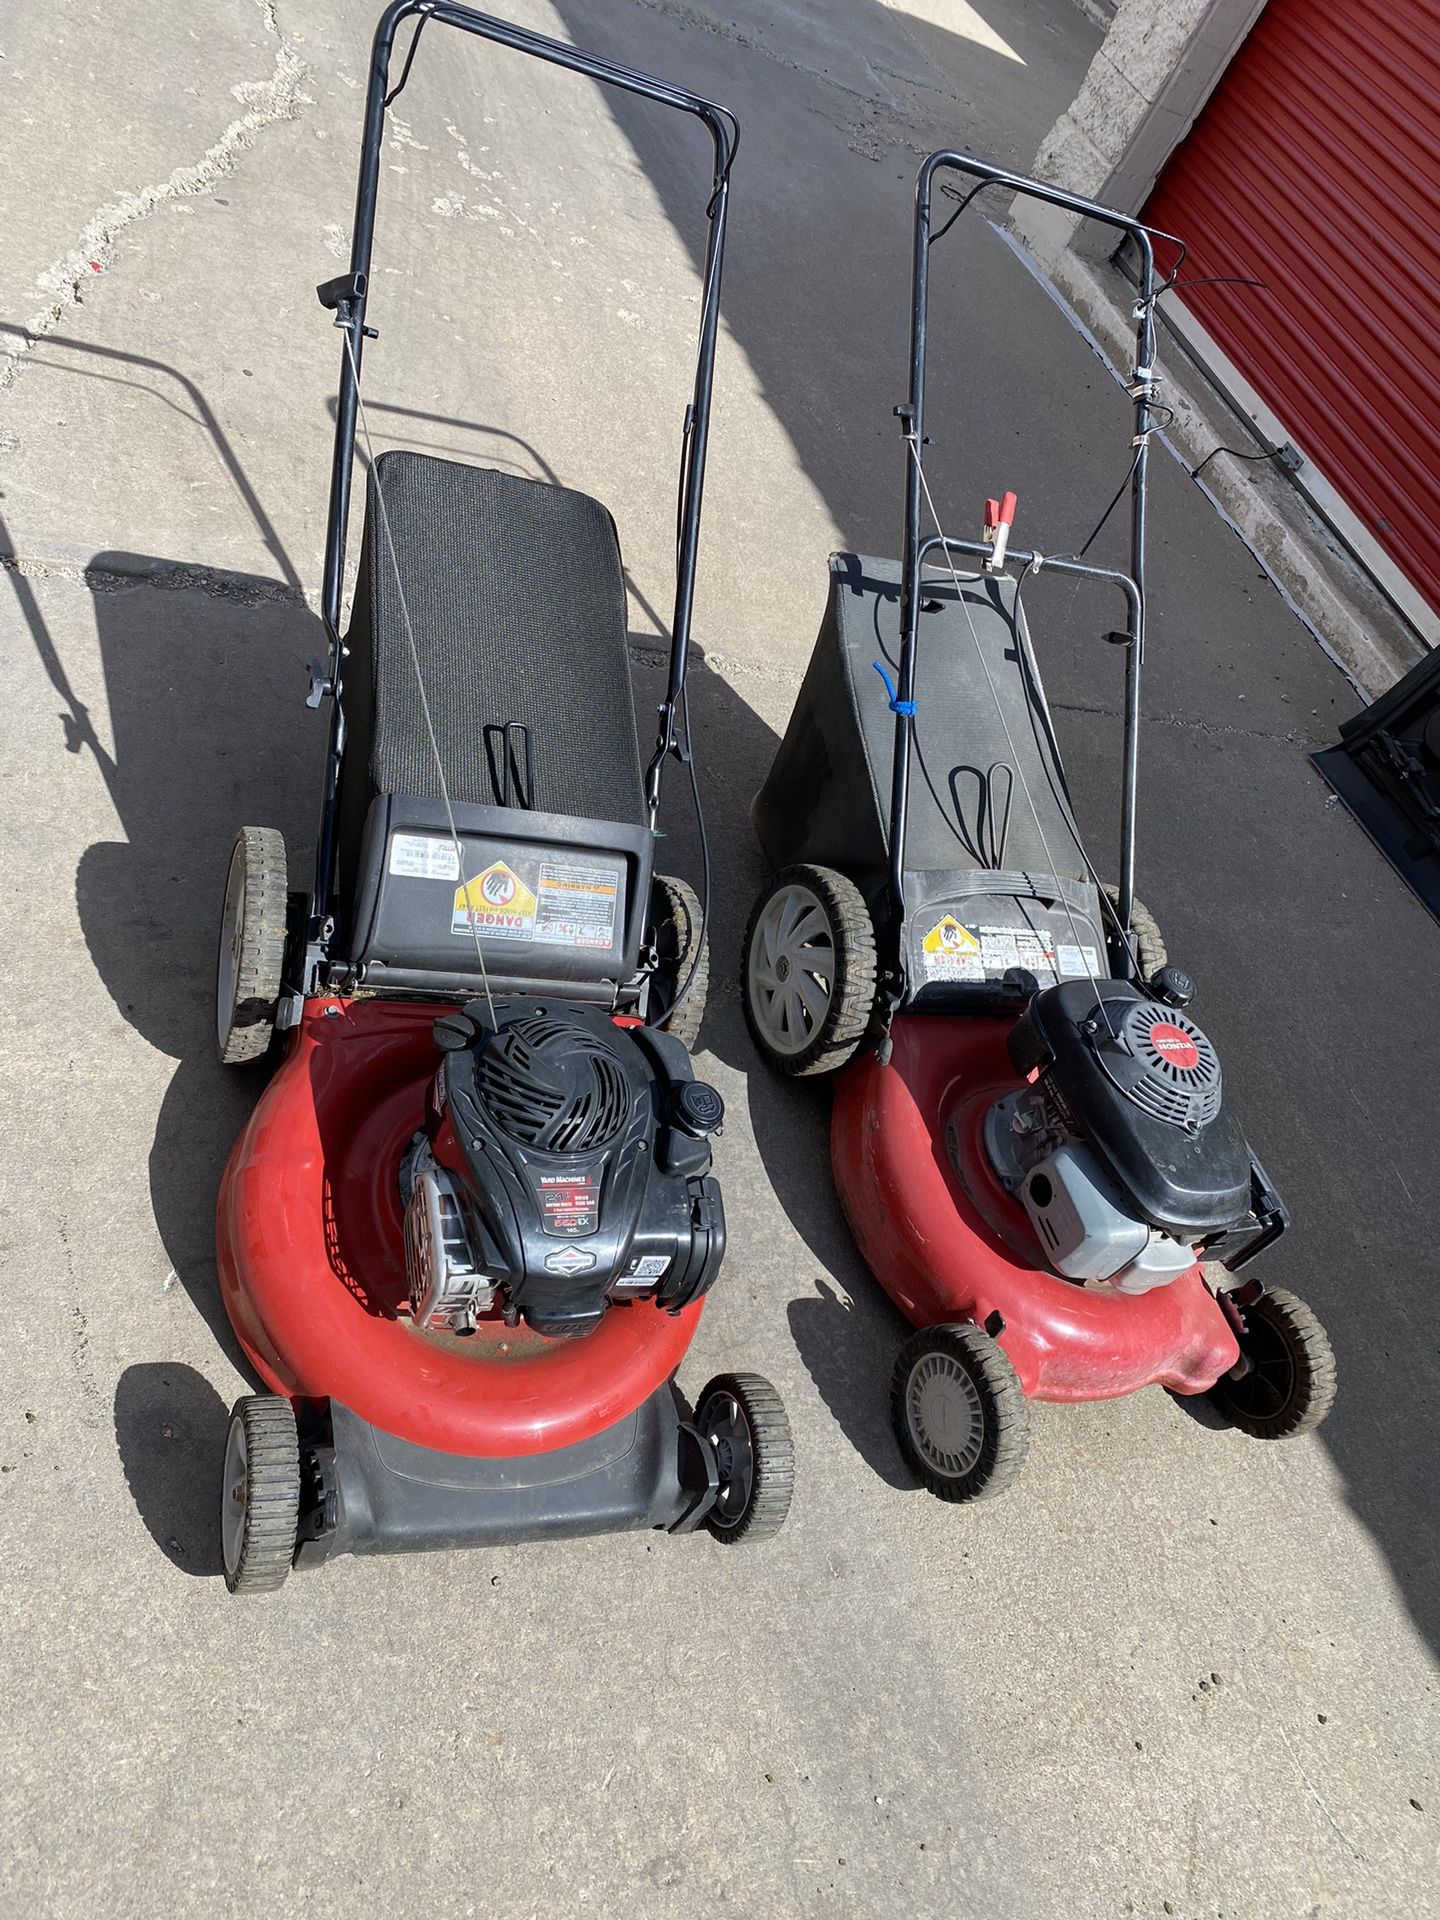 $90 Cash For Both The Briggs And Stratton Sells For Over $300 And It Mulches To I Can Deliver If You Throw In A Extra$20 For Gas.